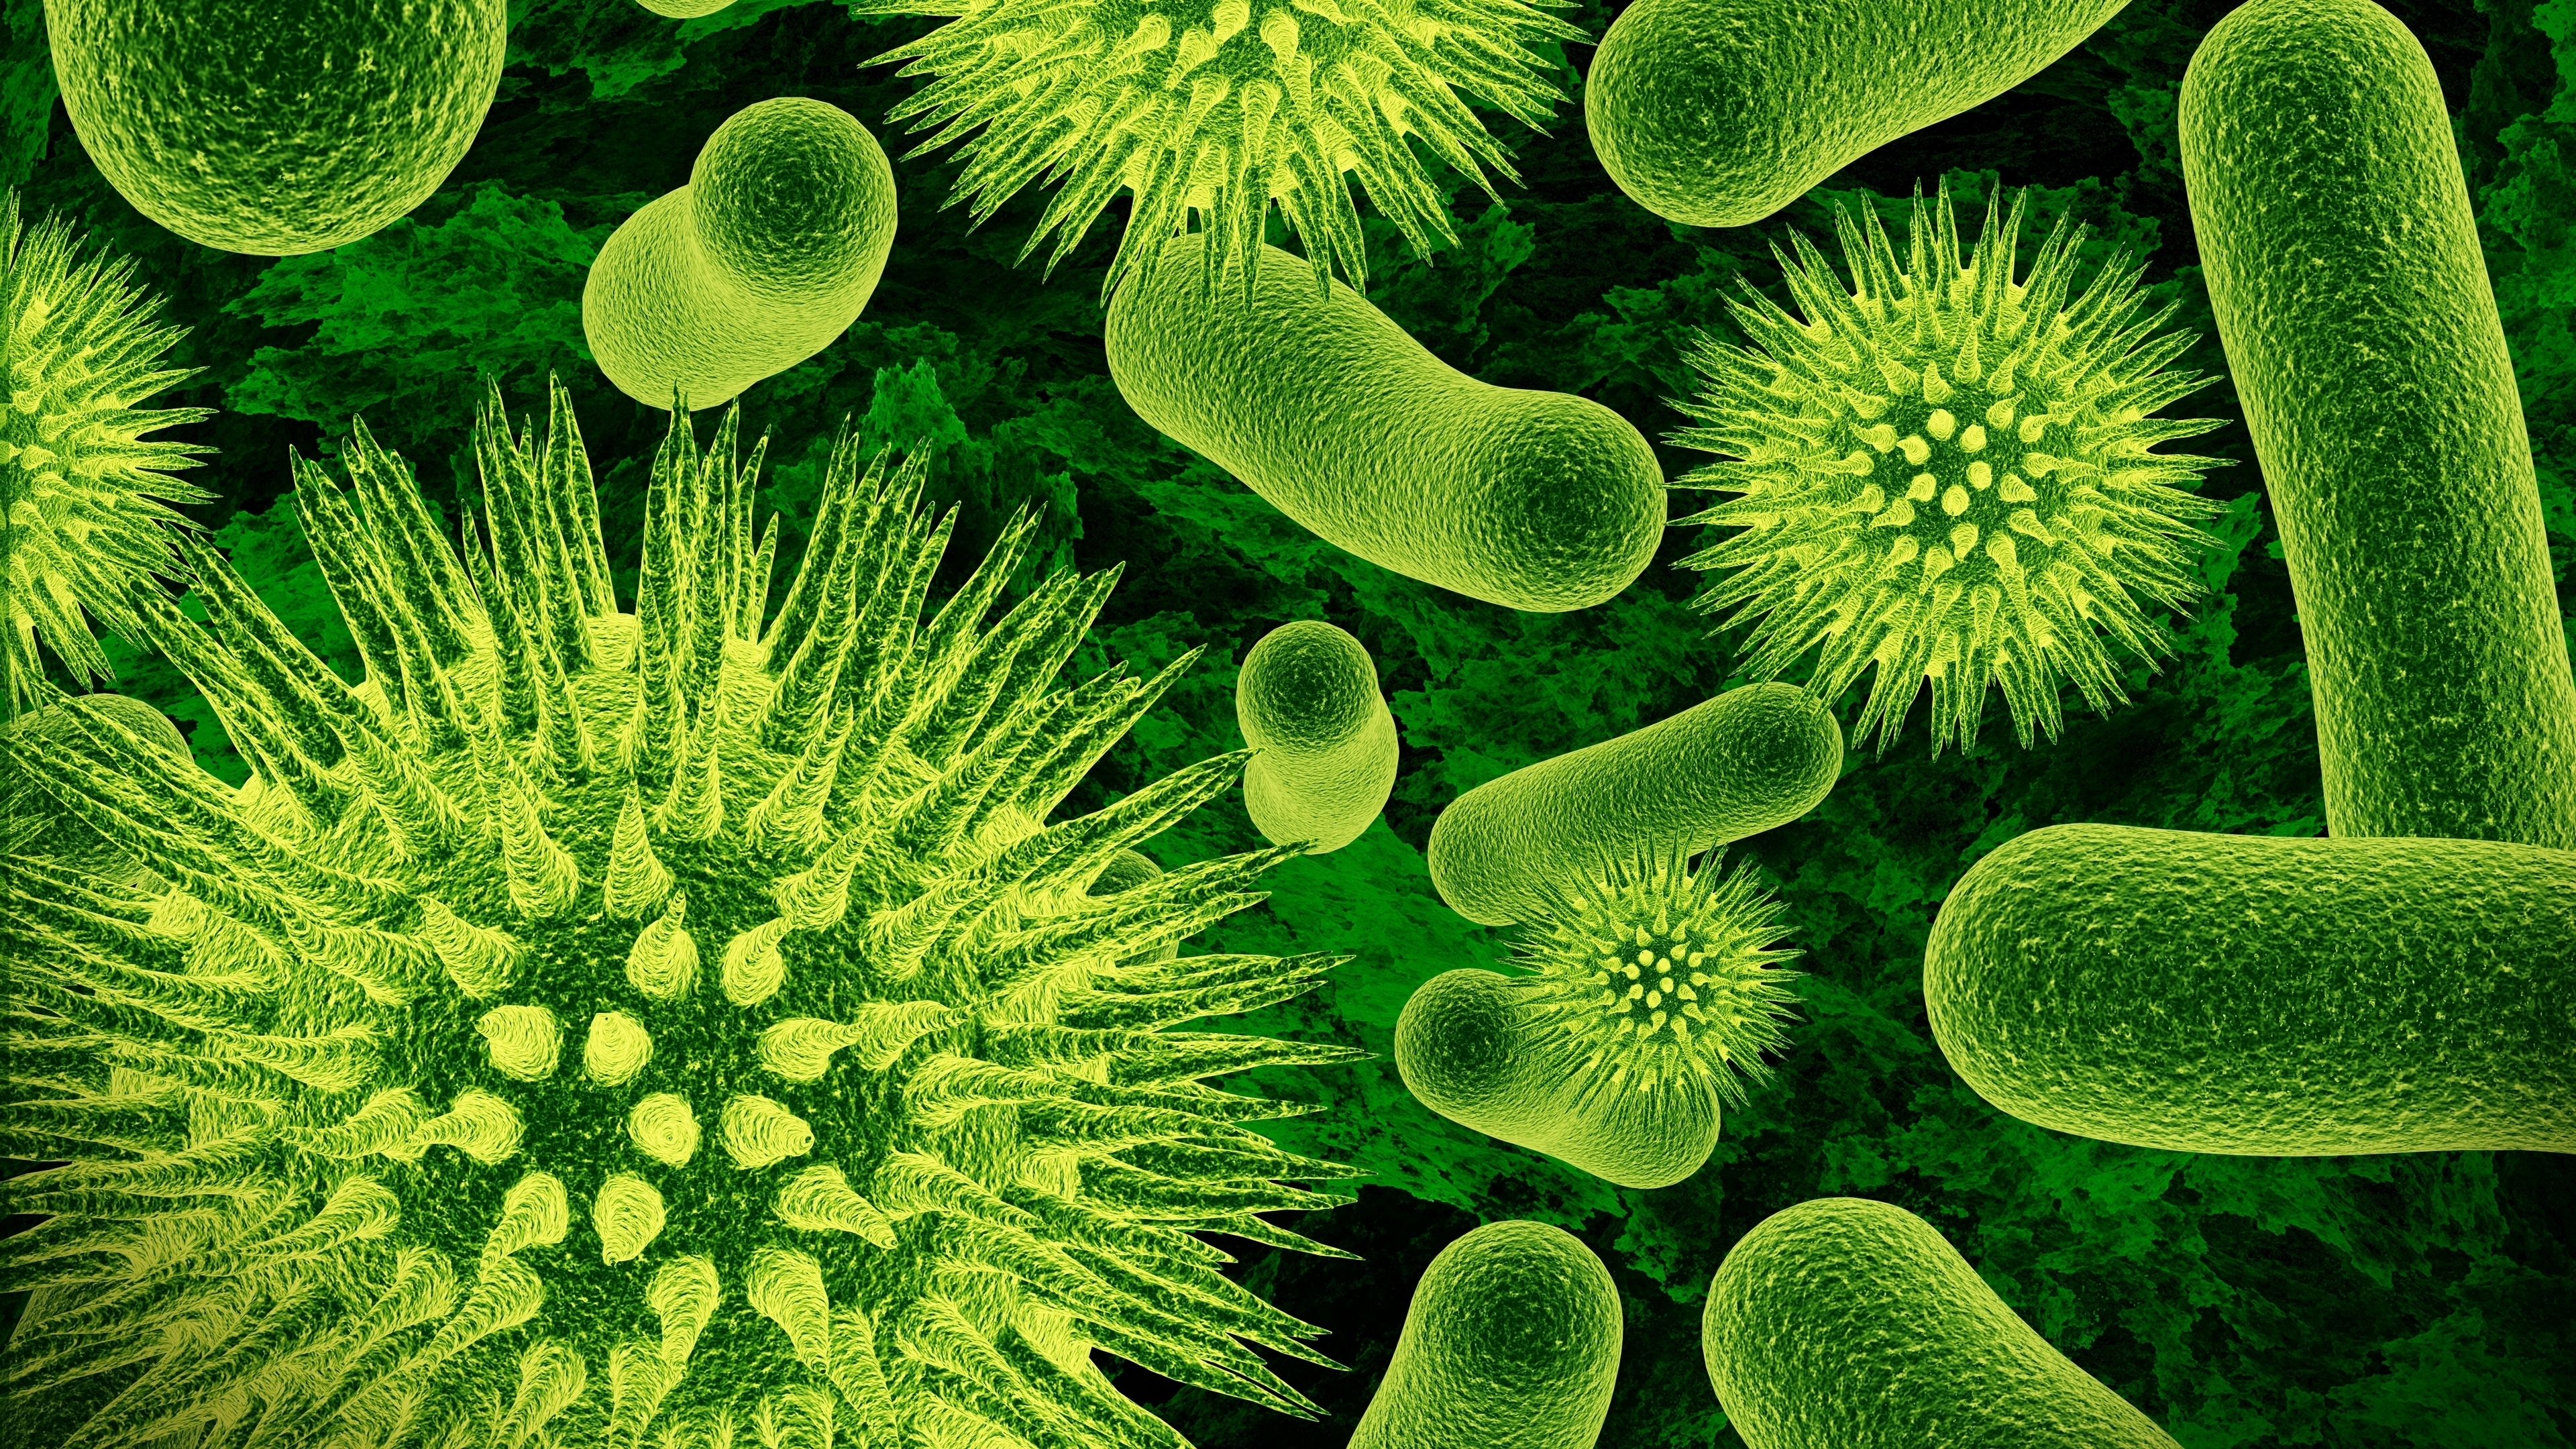 Bacteria for 3840 x 2160 Ultra HD resolution